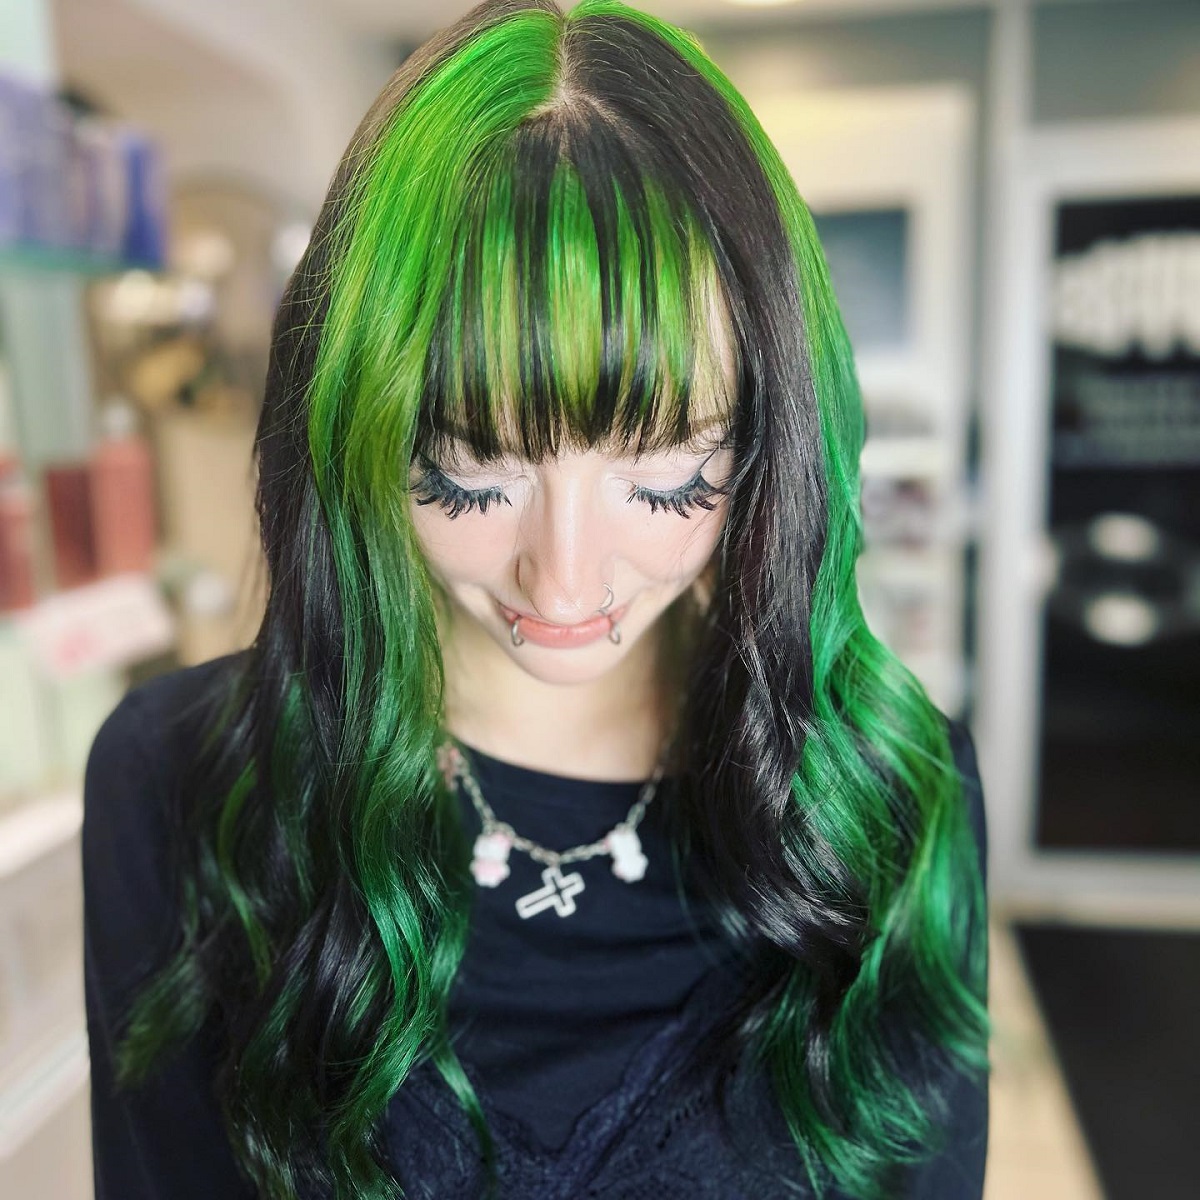 Black and Green Hair with Bangs